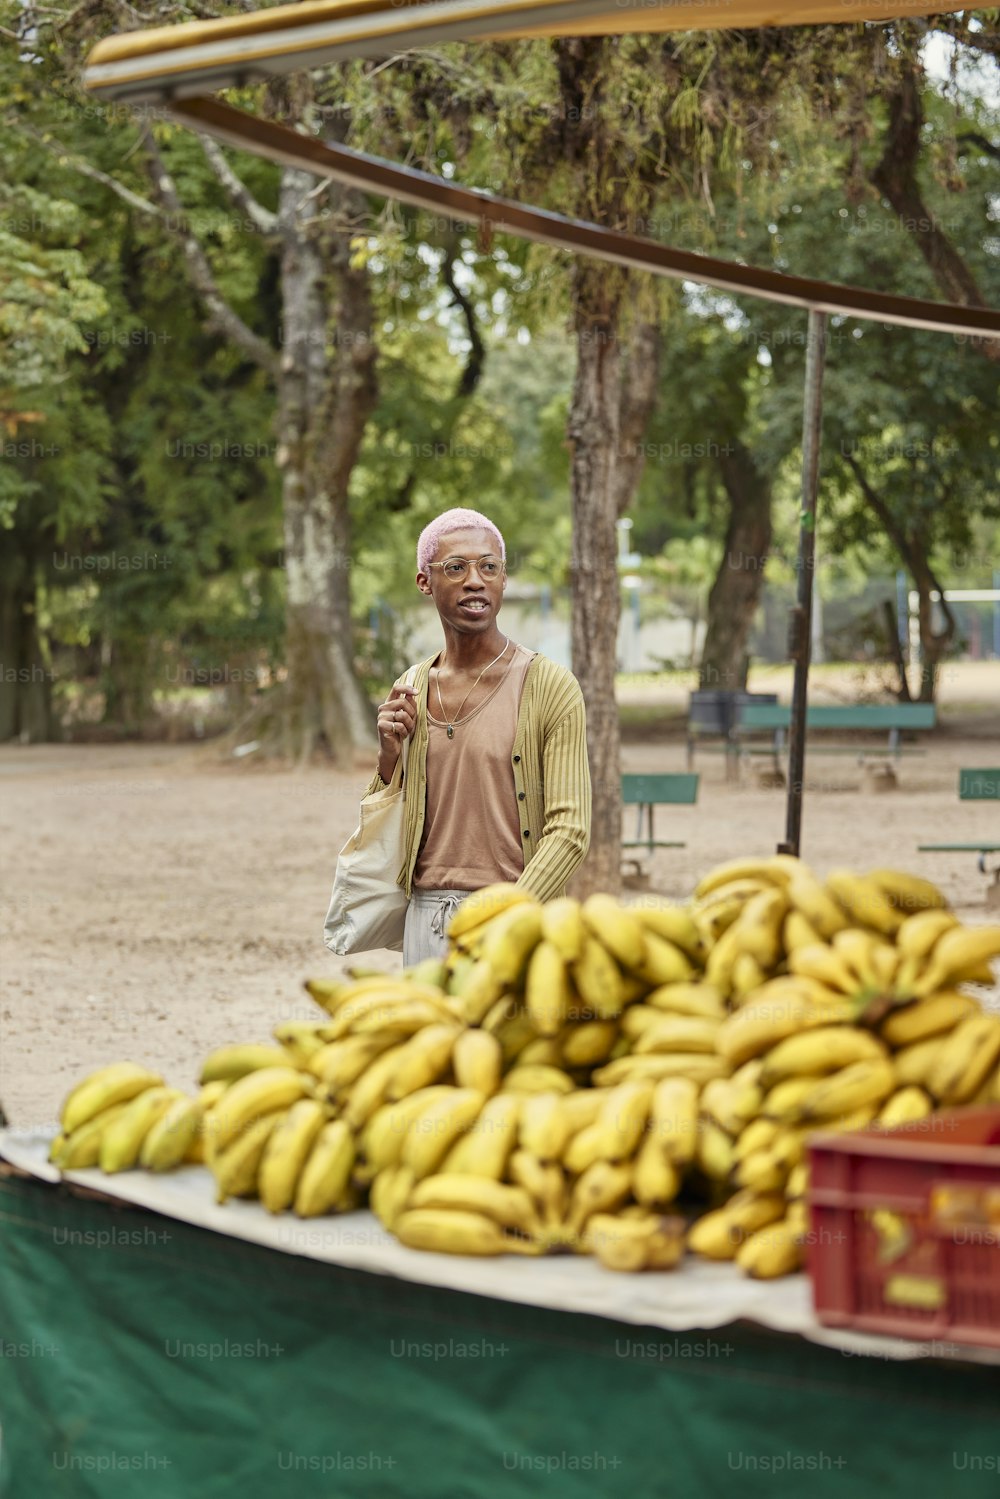 a man standing next to a pile of bananas